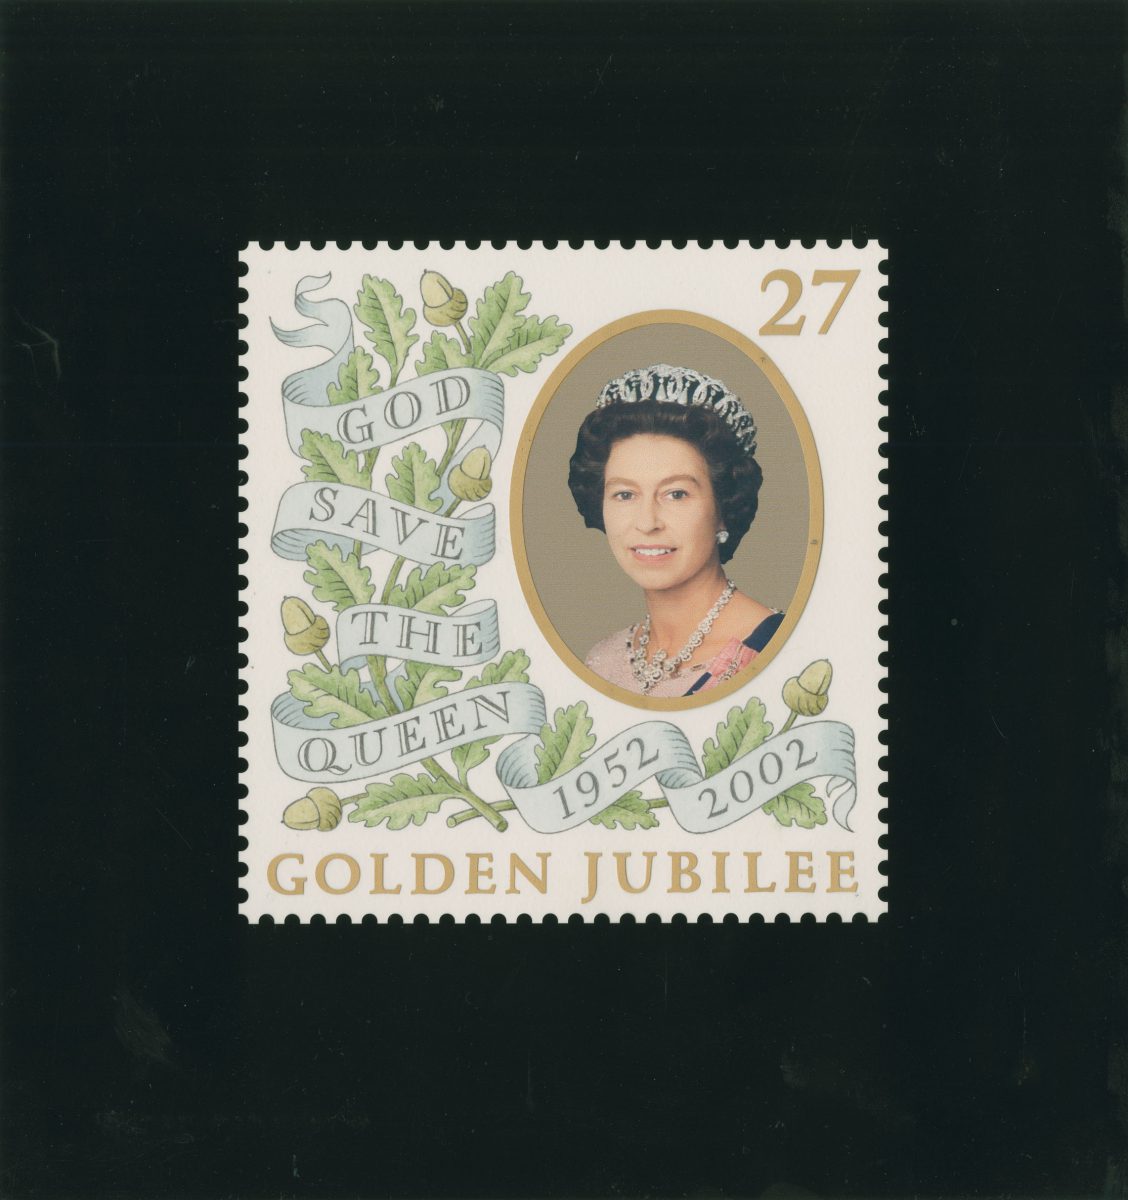 Artwork consisting of a portrait of Queen Elizabeth II in an oval next to the text 'God Save The Queen' in a coiling banner.